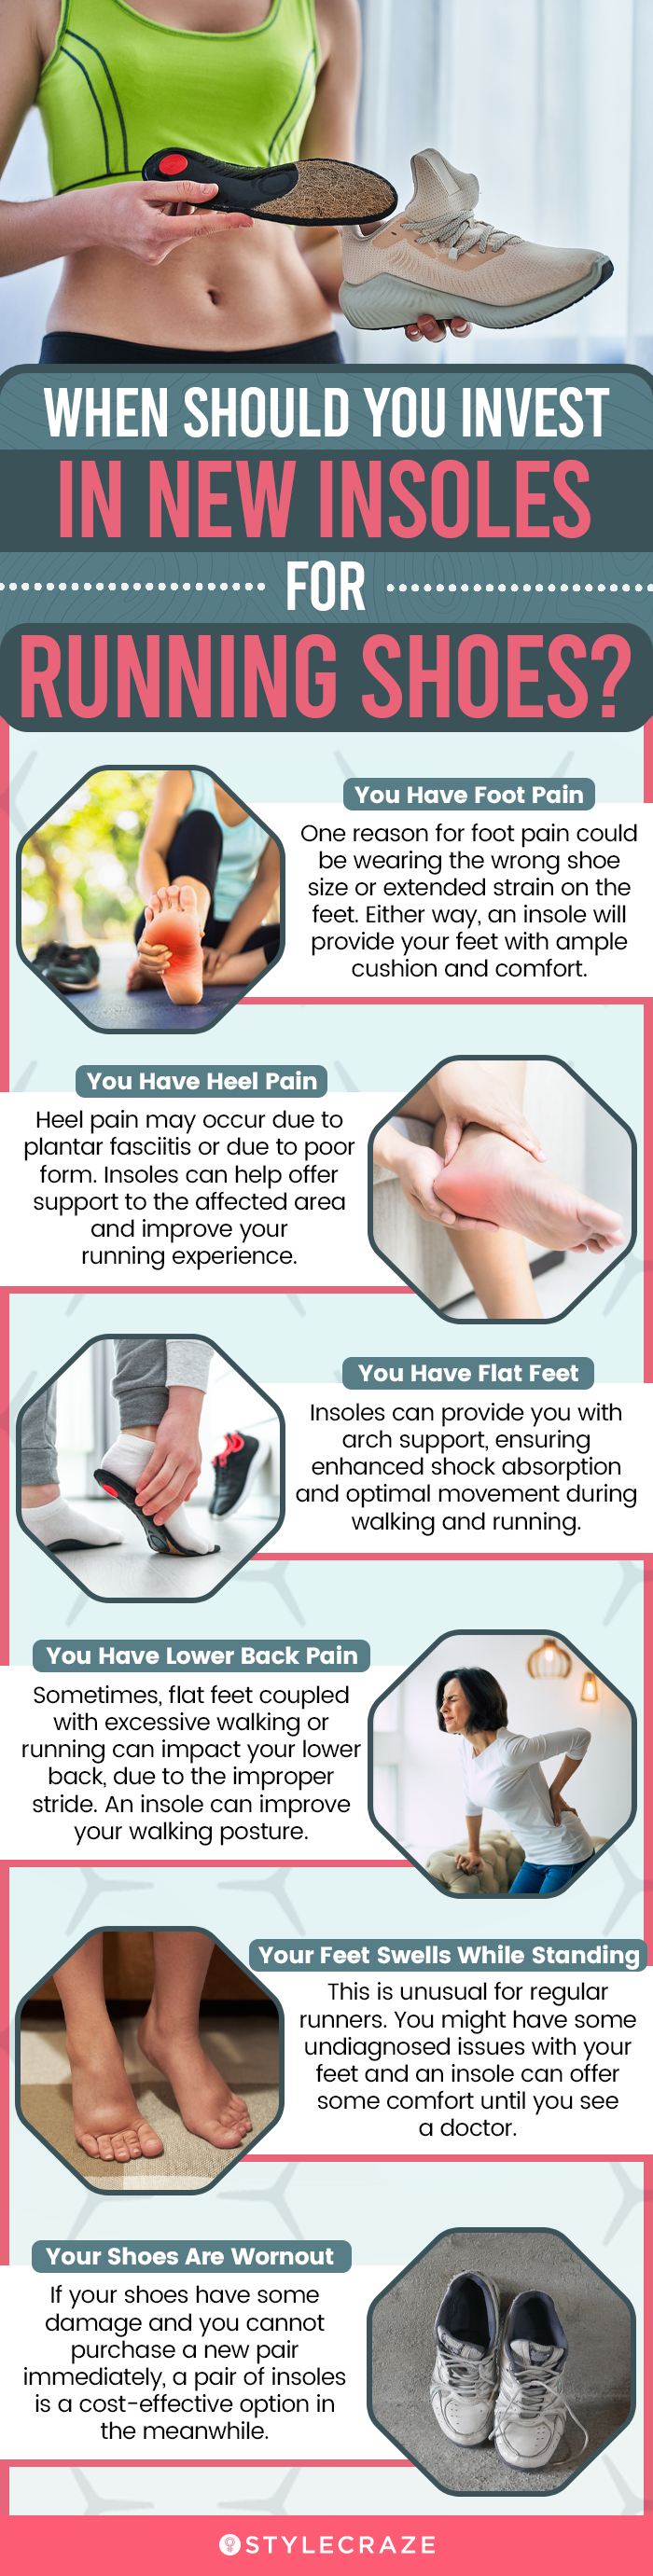 When Should You Invest In New Insoles For Running Shoes? (infographic)